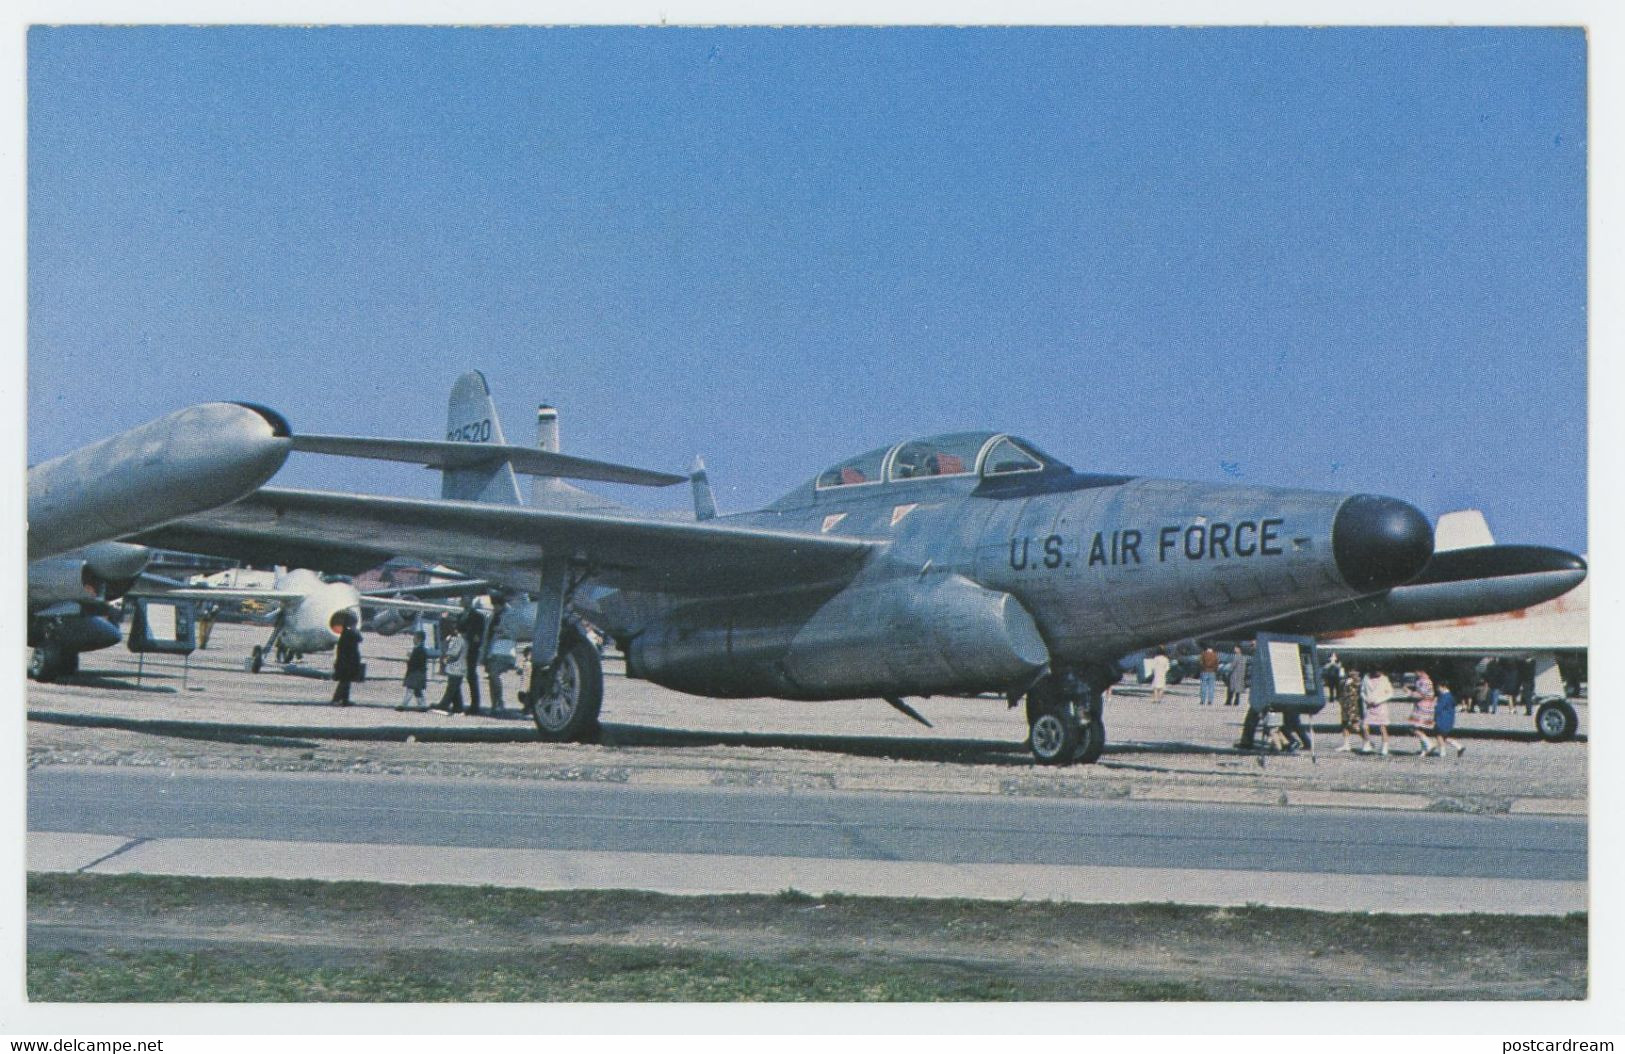 USAF OH Museum F-89 FIGHTER JET Postcard - Pittsburgh